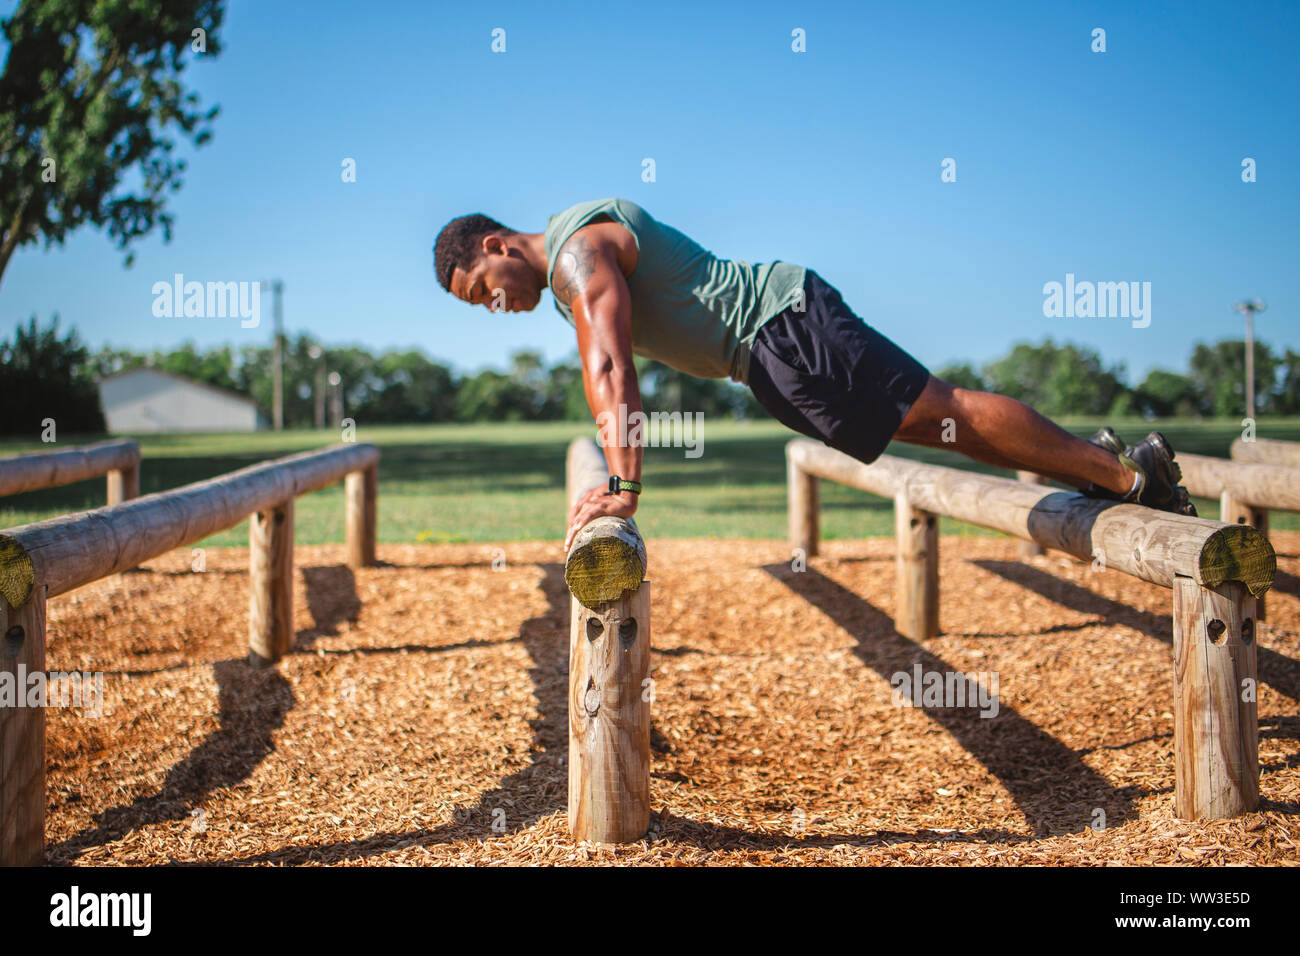 A strong man performs pushups stretched across wood beams in park Stock Photo